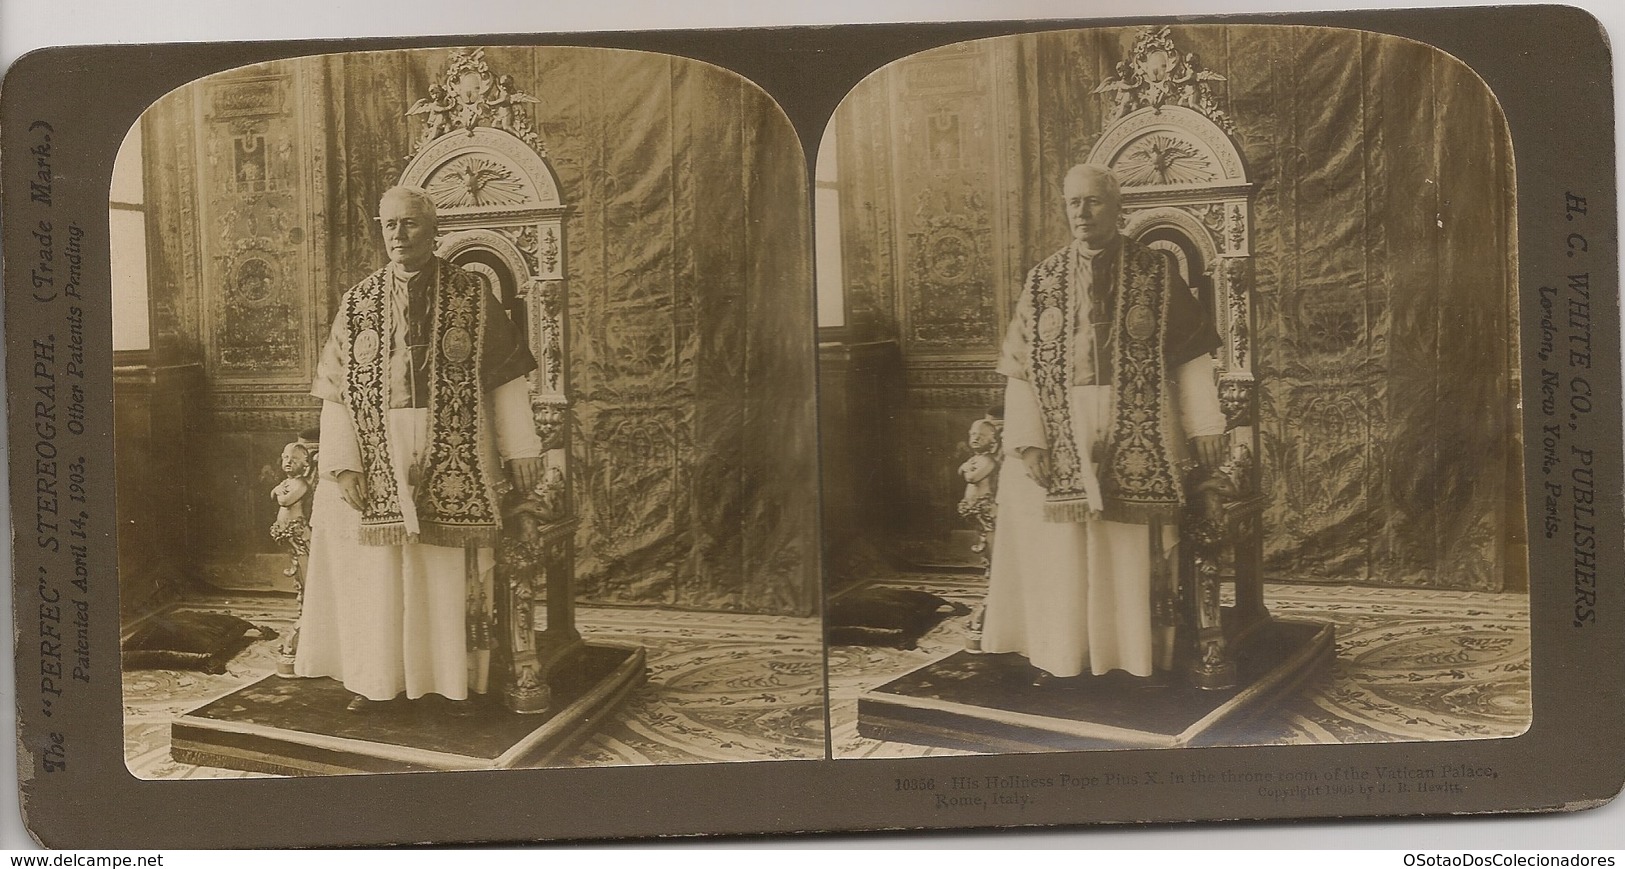 STEREO Italy - Stereoscopic Rome - His Holiness Pope Pio X, In The Throne Room Of The Vatican Palace - H. C. WHITE CO - Visionneuses Stéréoscopiques